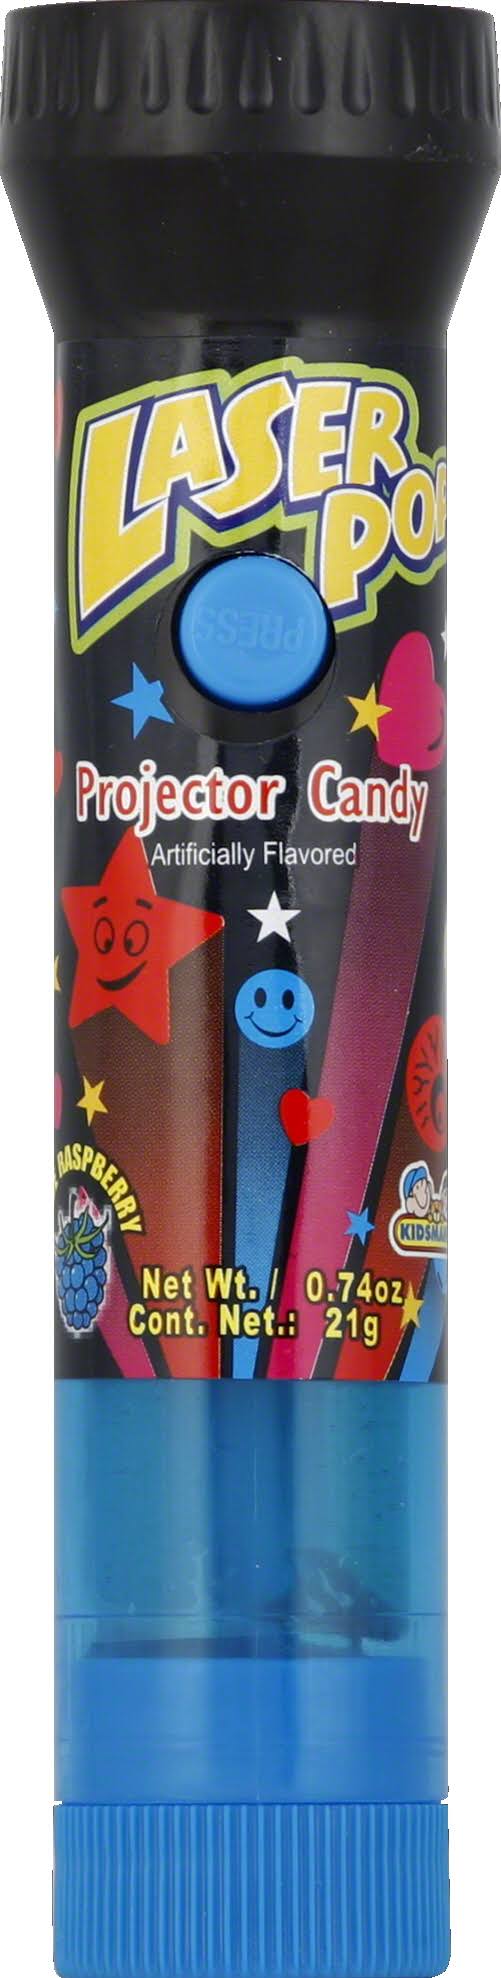 Laser Pop Projector Candy - 3pk, Assorted Flavors